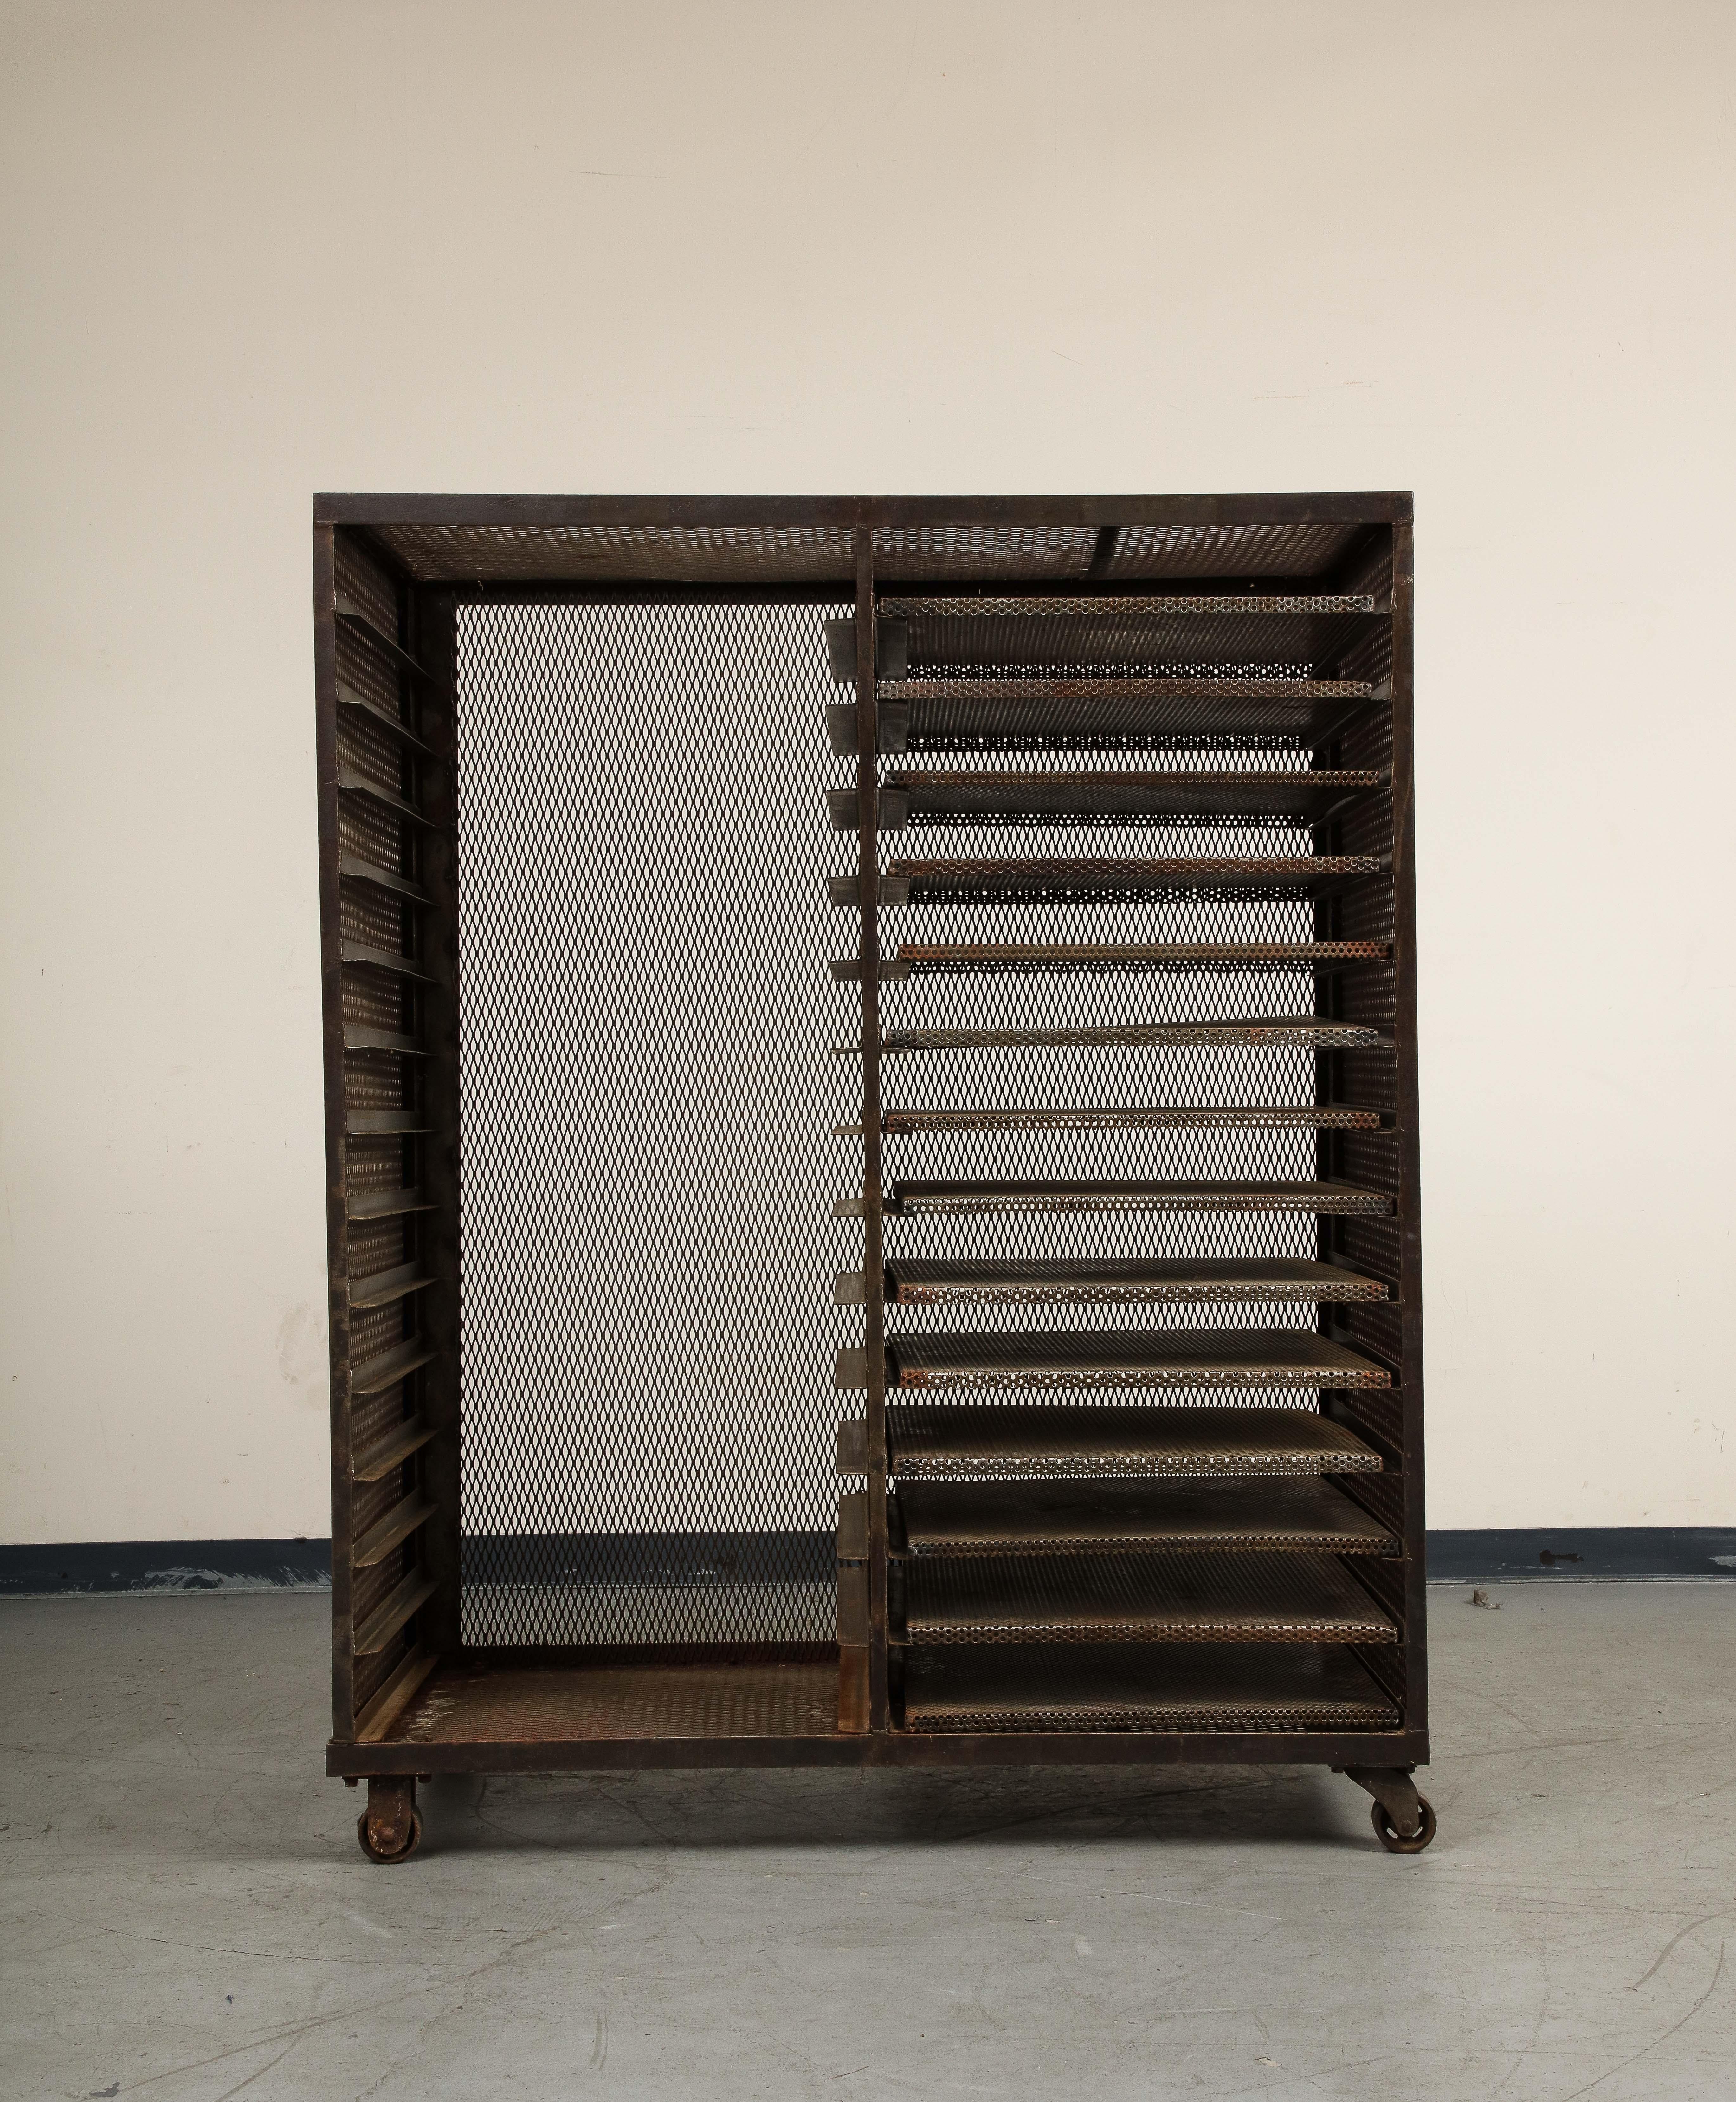 Vintage French 20th Century industrial style baker's rack or etagere on casters, entirely made of perforated steel. Shelves can be moved from either side, fixed heights are symmetrical.